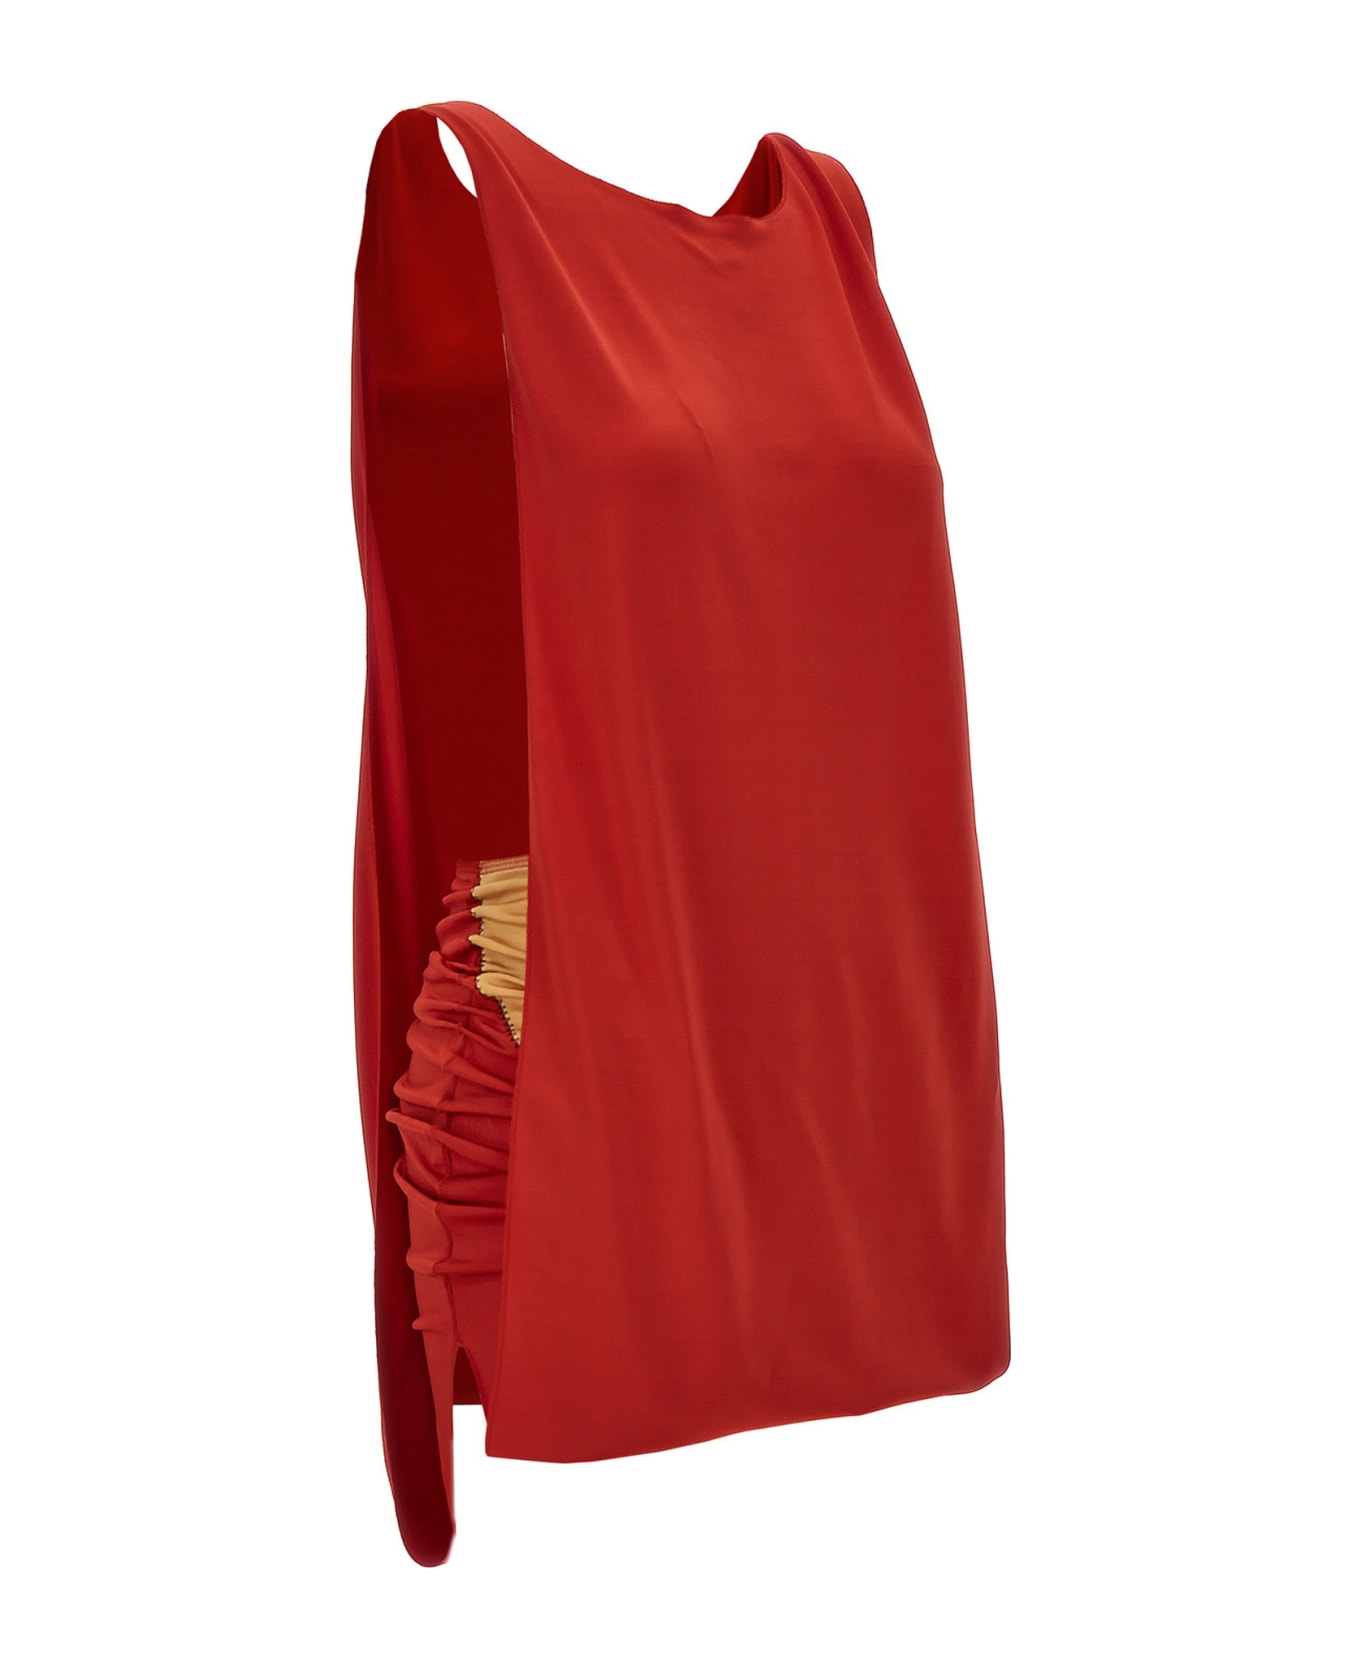 Marni Dress With Side Slits - Red